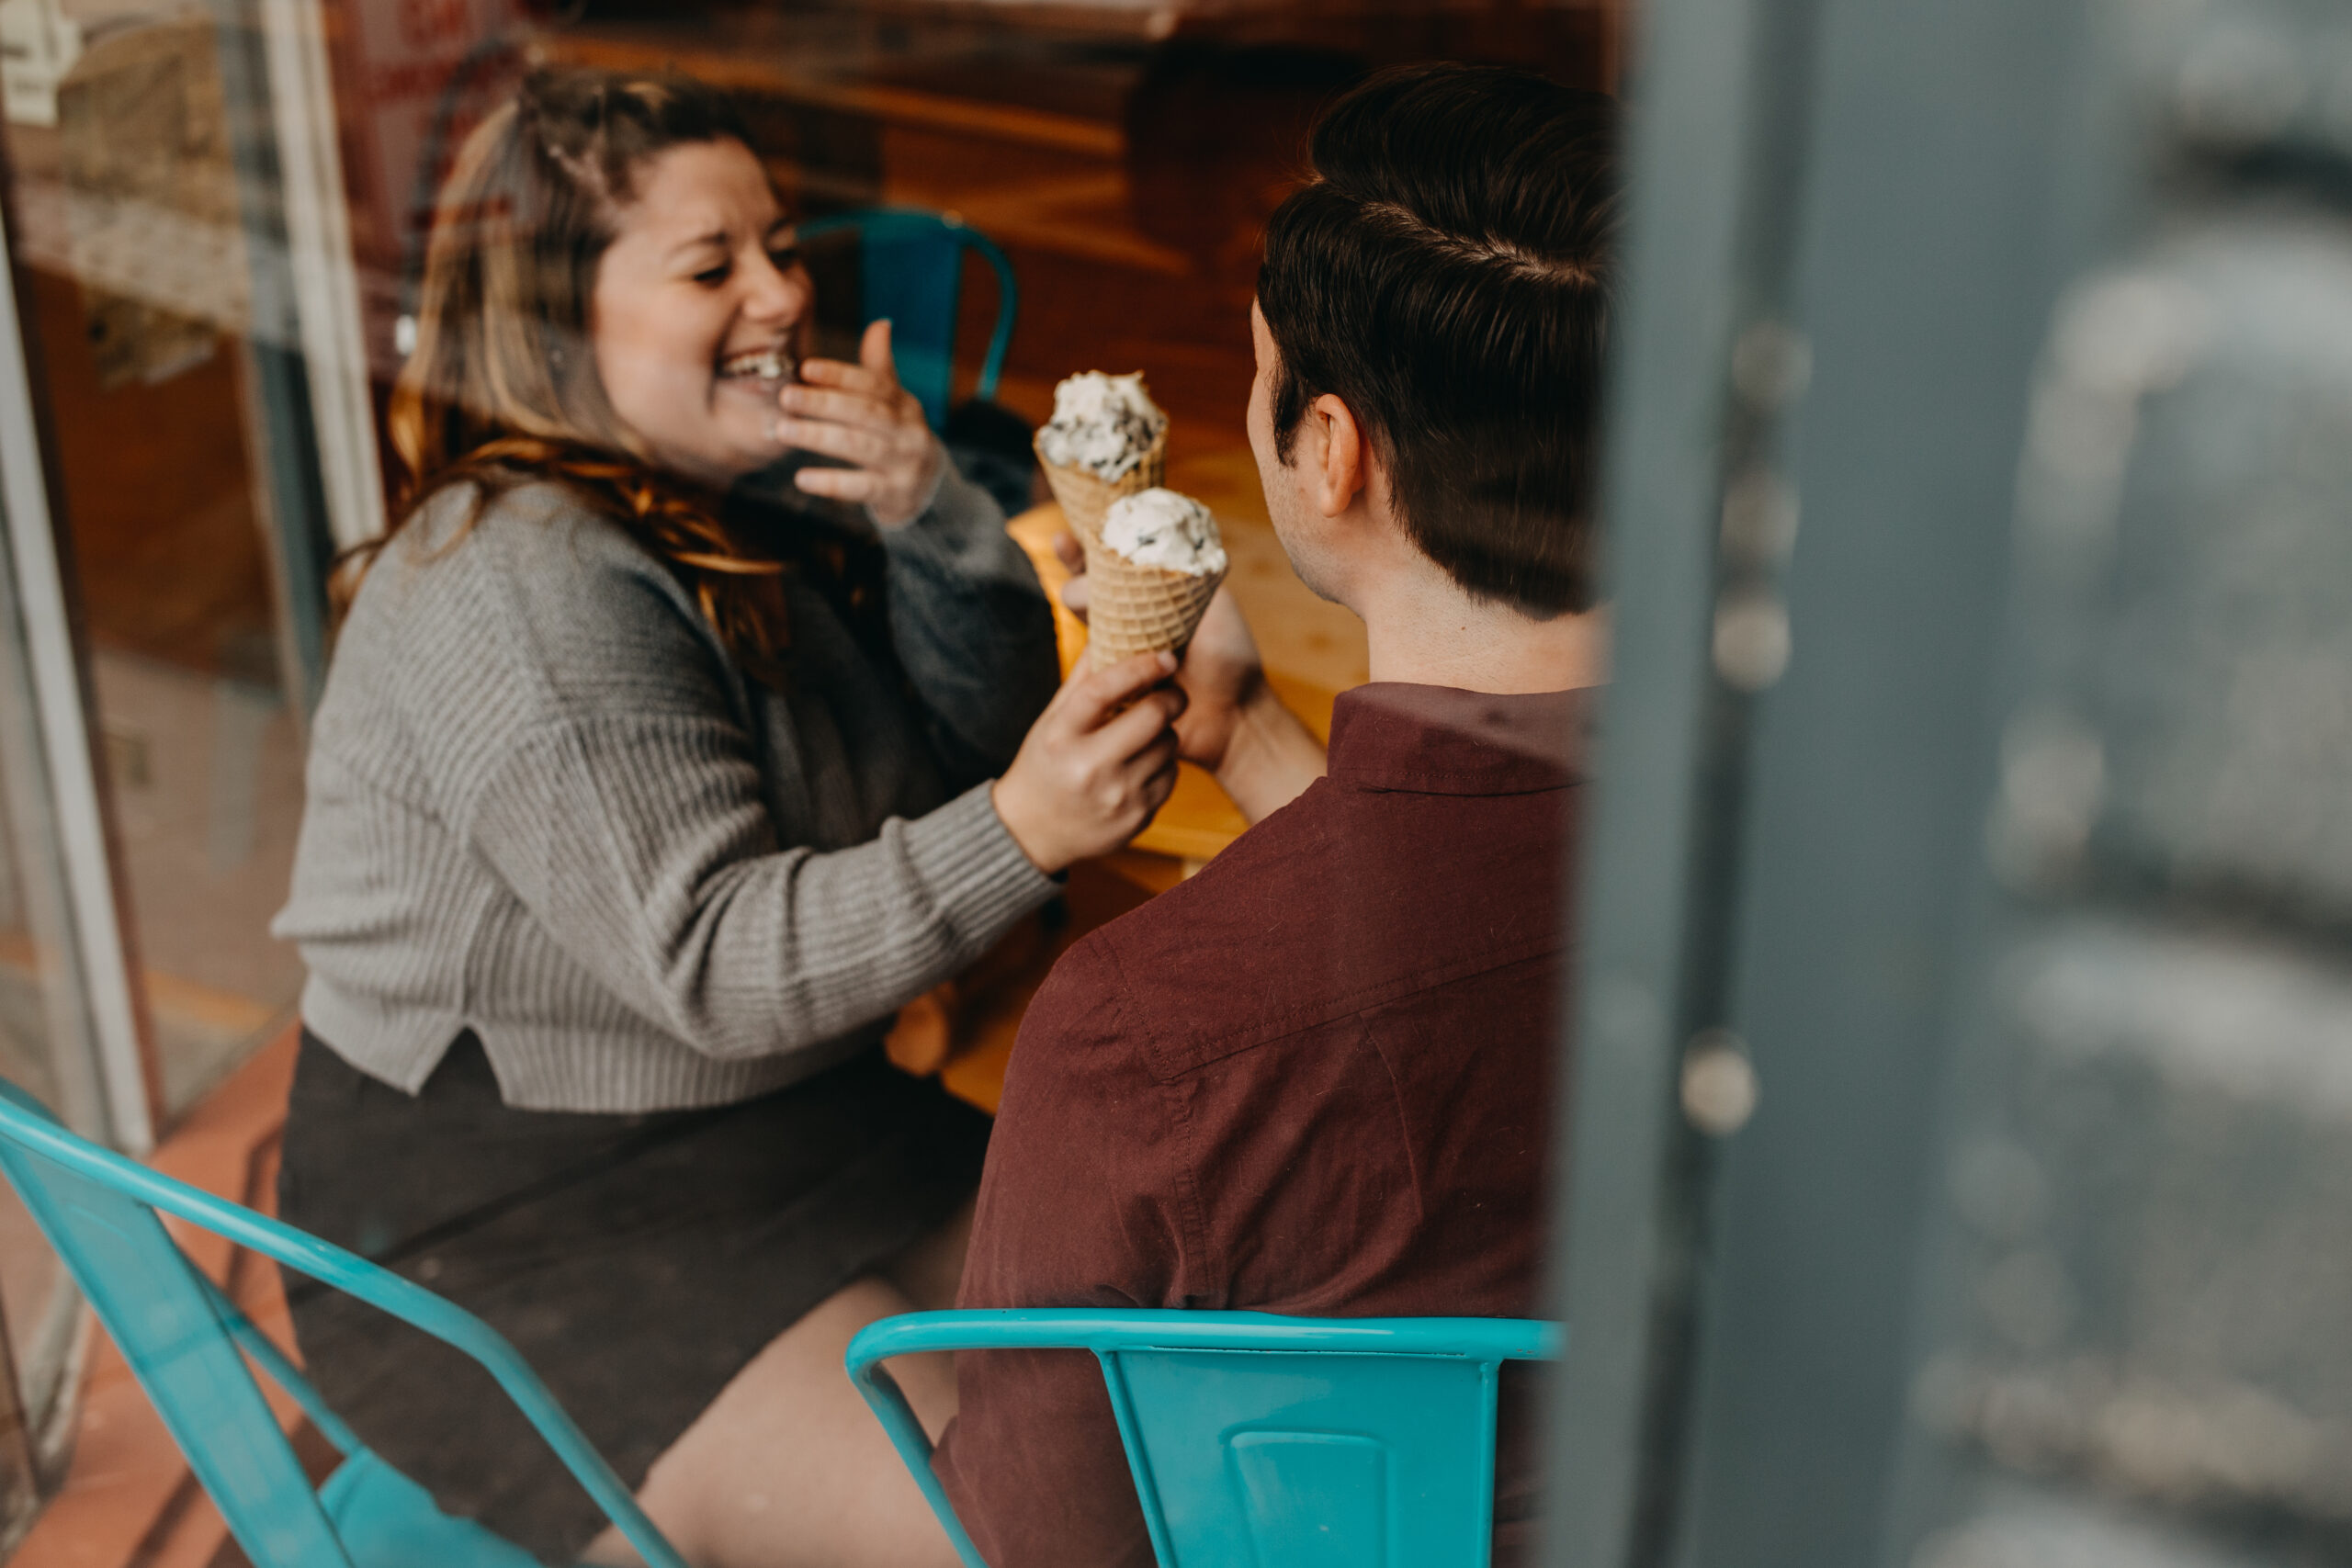 Couple laughing together during a date eating ice cream